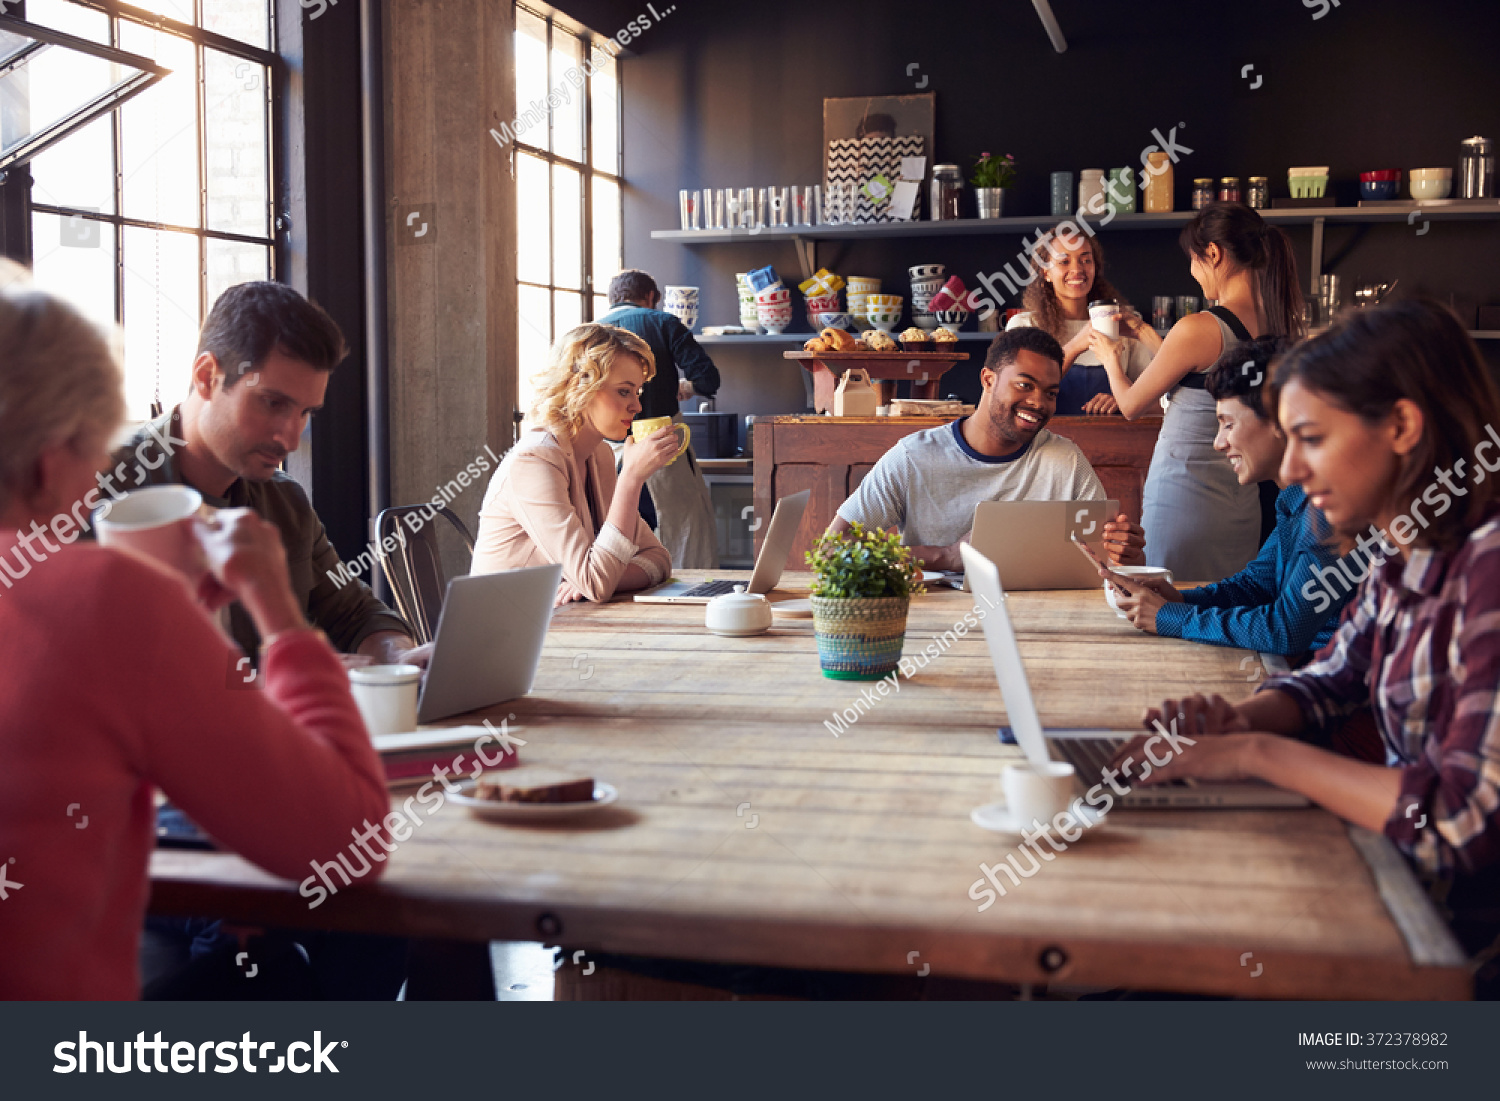 Interior Of Coffee Shop With Customers Using Digital Devices #372378982